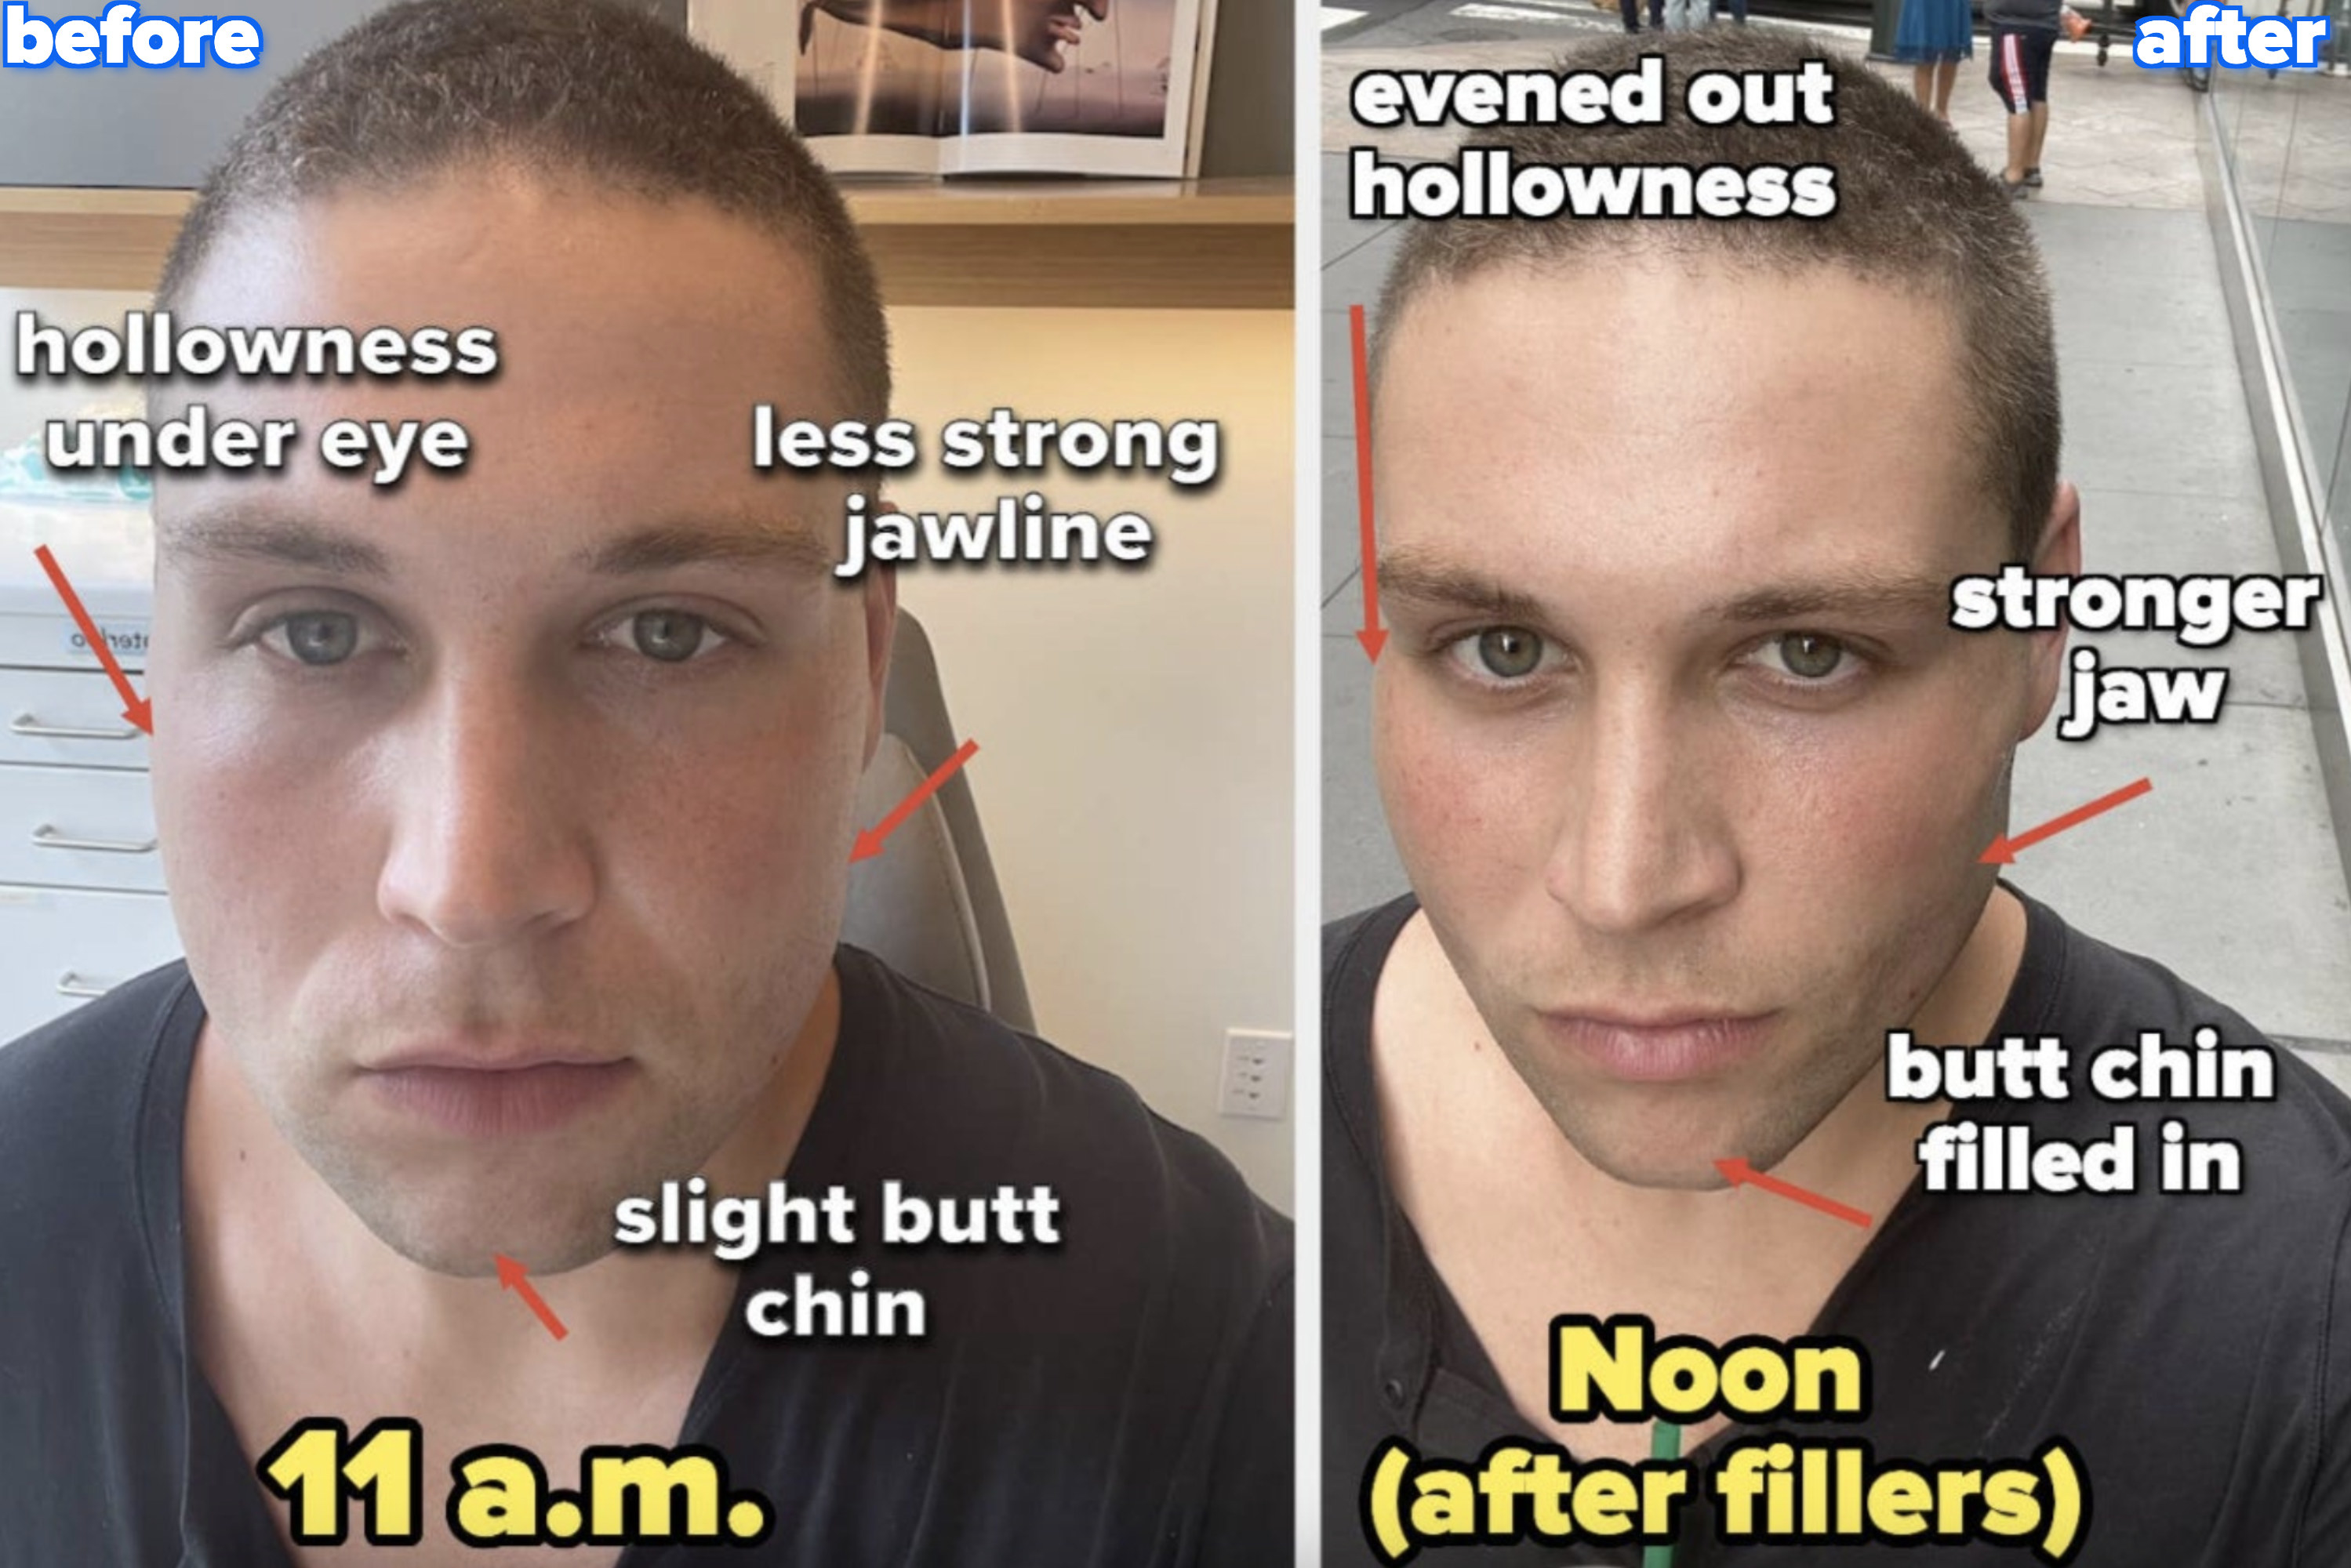 Before at 11 am: hollowness under eye, less strong jawline, and slight butt chin; after fillers at noon: evened out eye hollowness, stronger jaw, butt chin filled in